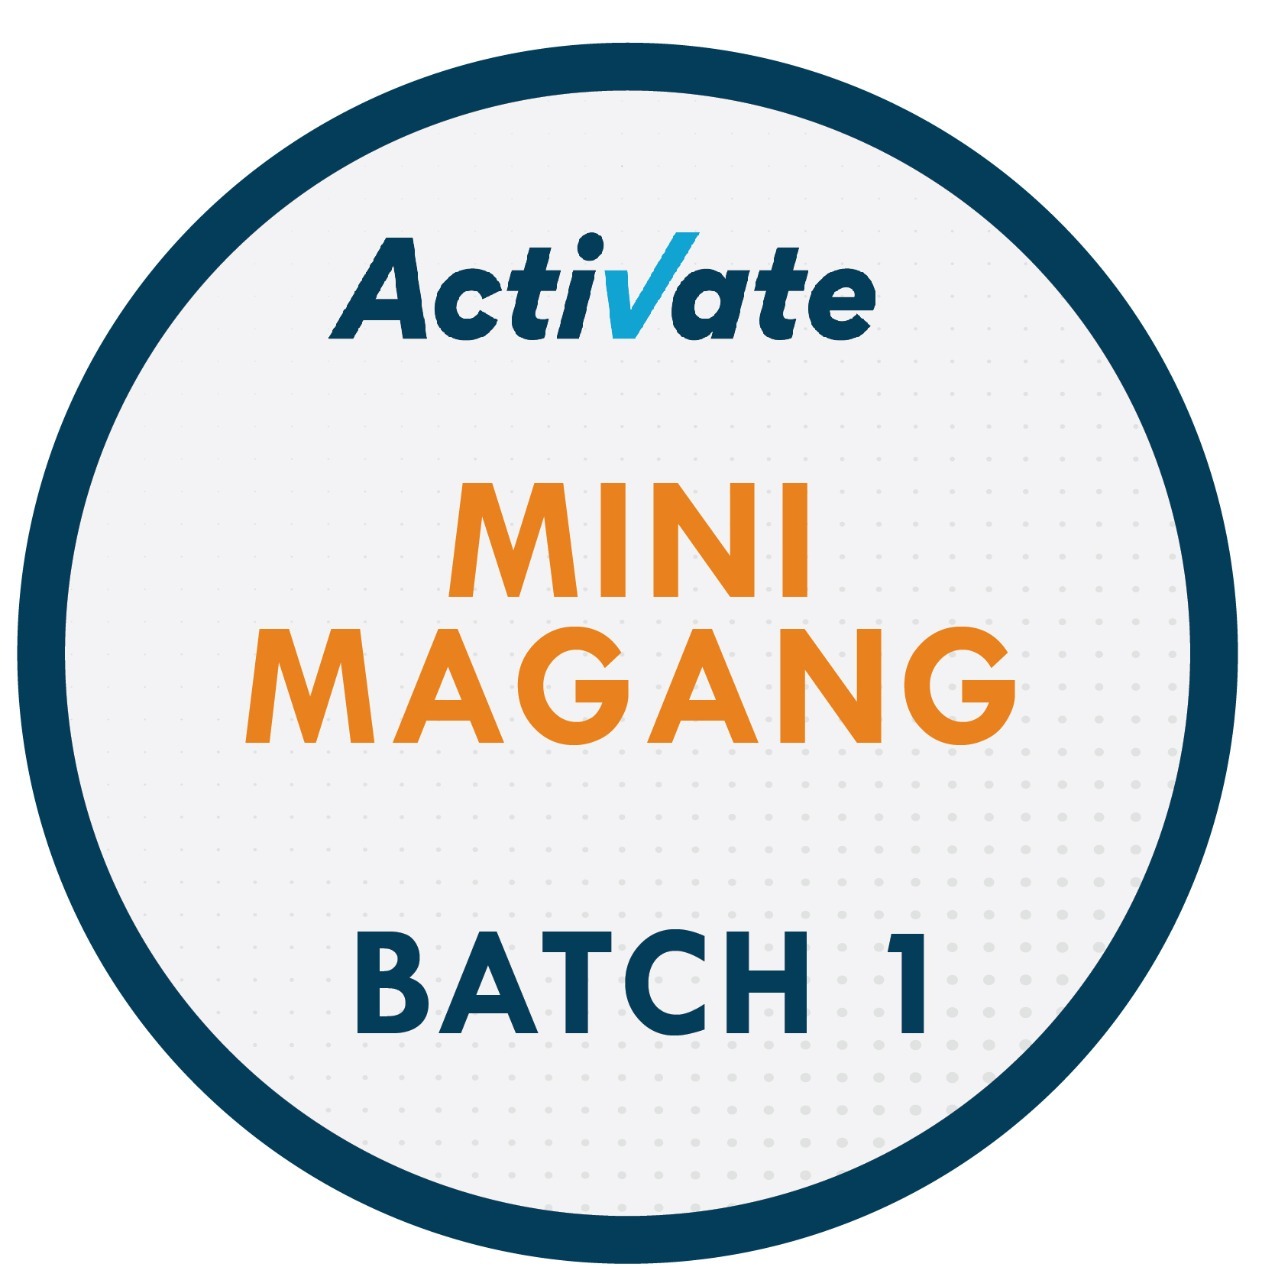 Activate Mini Magang Batch 1